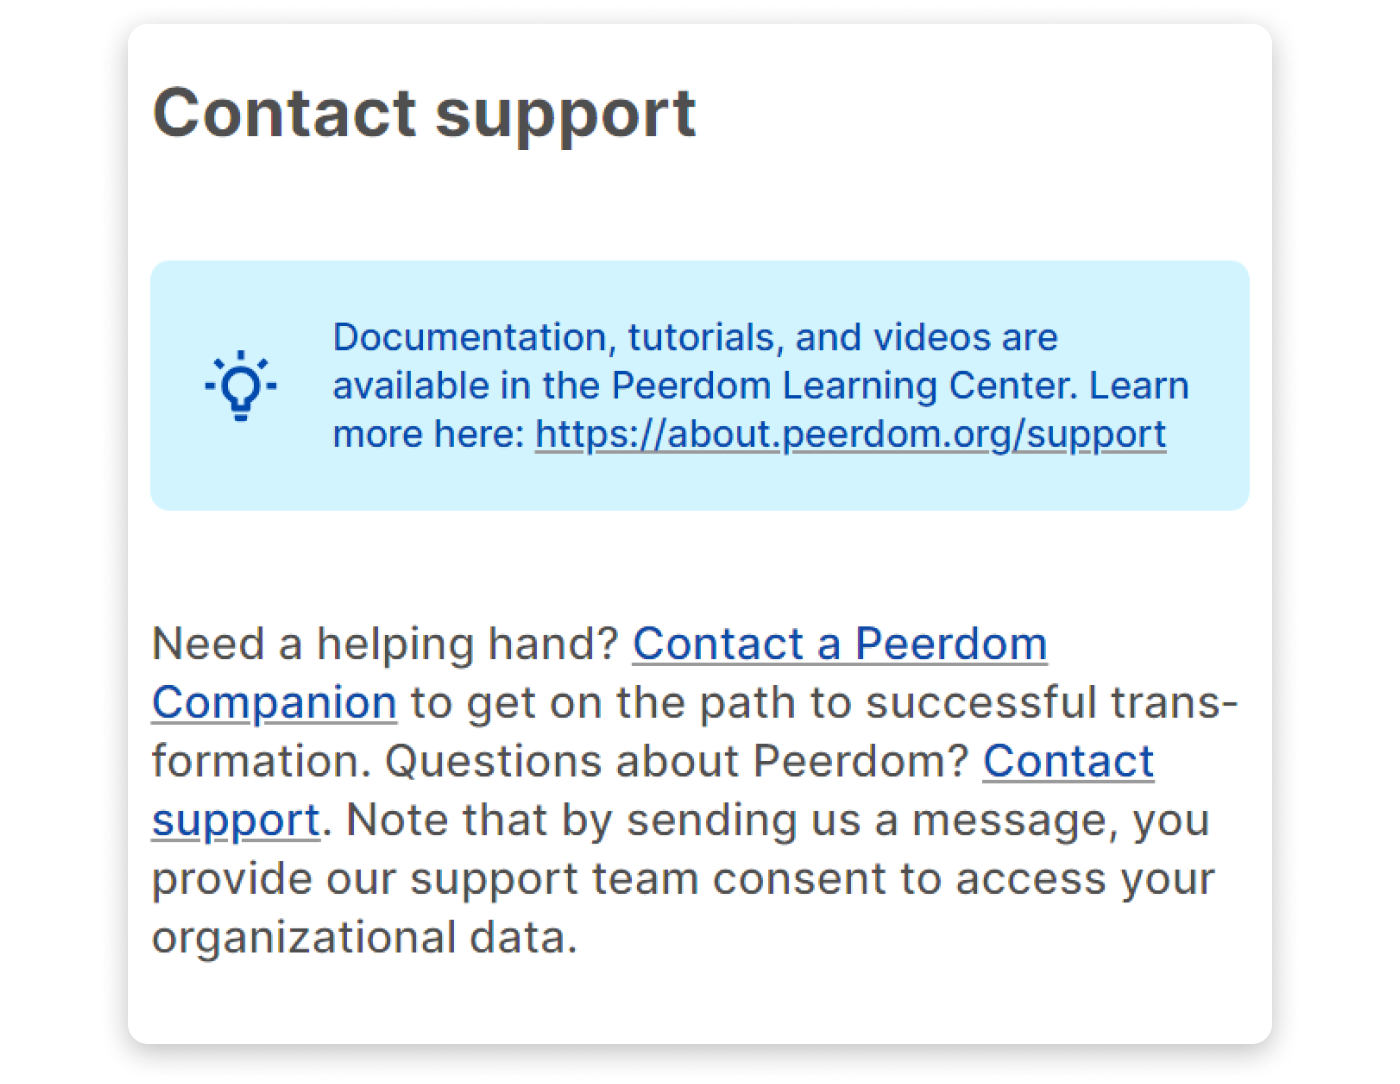 If you contact support you are consenting to sharing company data.